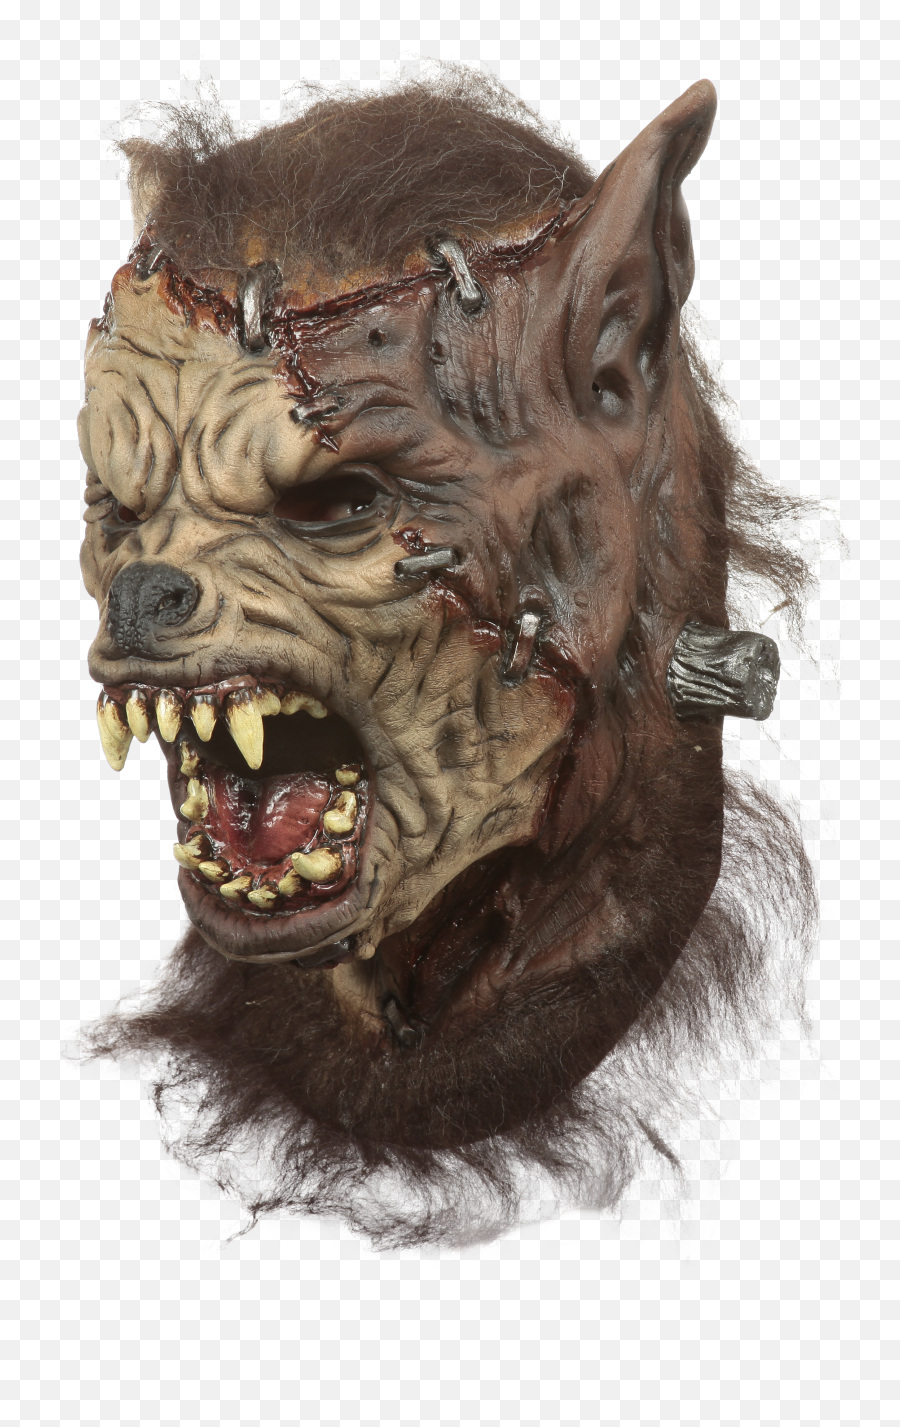 Zombie Teeth Png - Home Demon 4756451 Vippng Demon,Demon Transparent